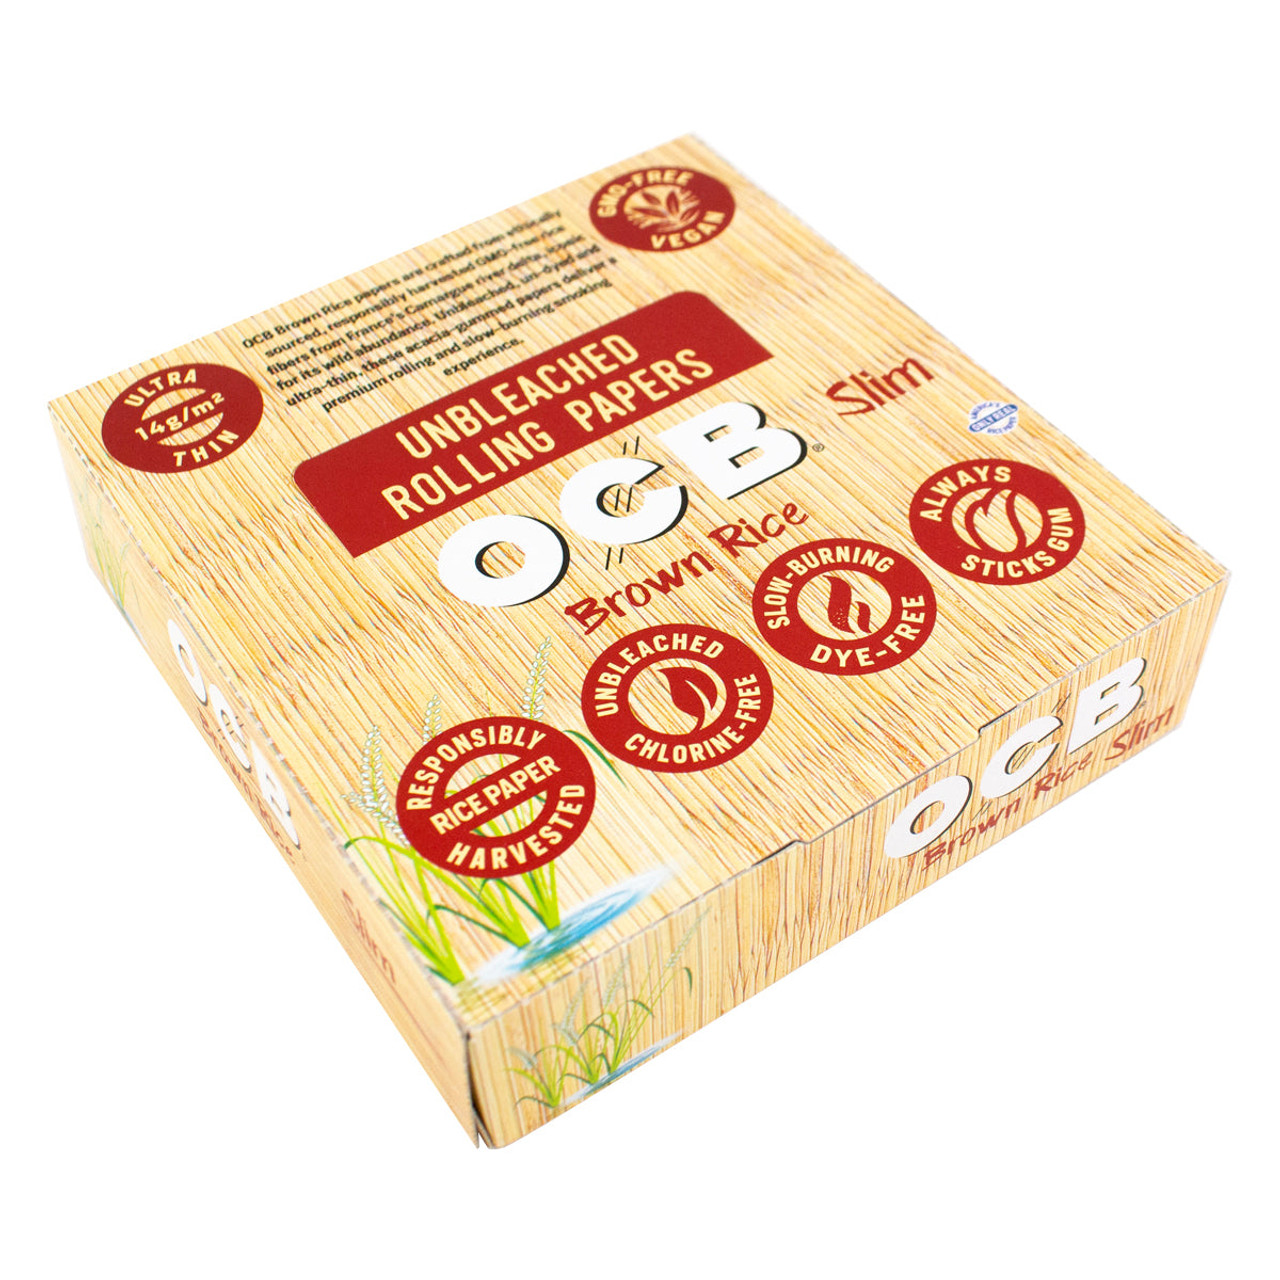 OCB Papers + Tips + Tray Roll Kit - Display of 20, Rolling Papers